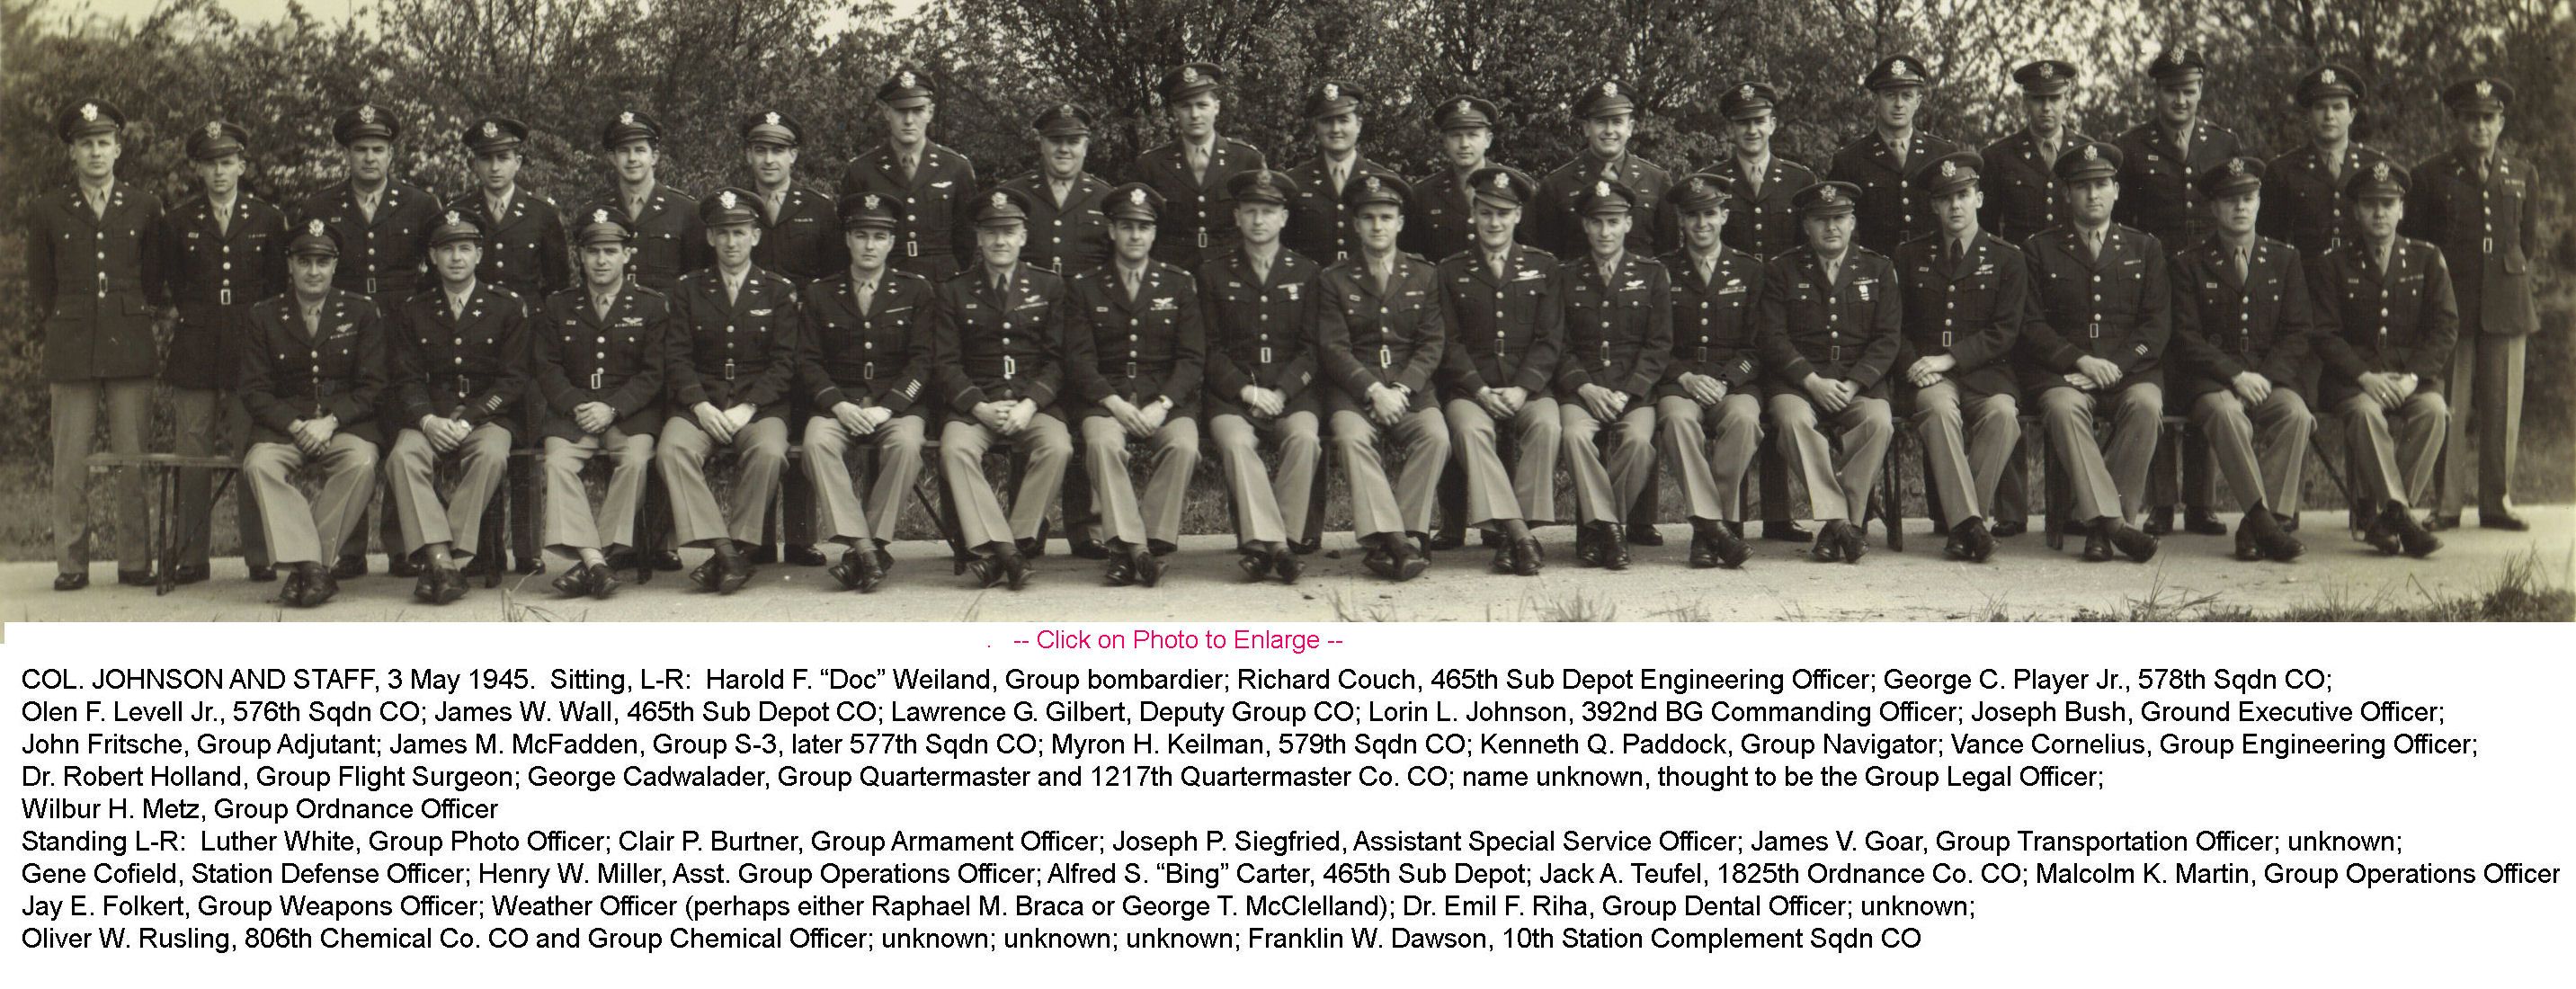 392nd_Staff_Officers_3May45_for_Bob